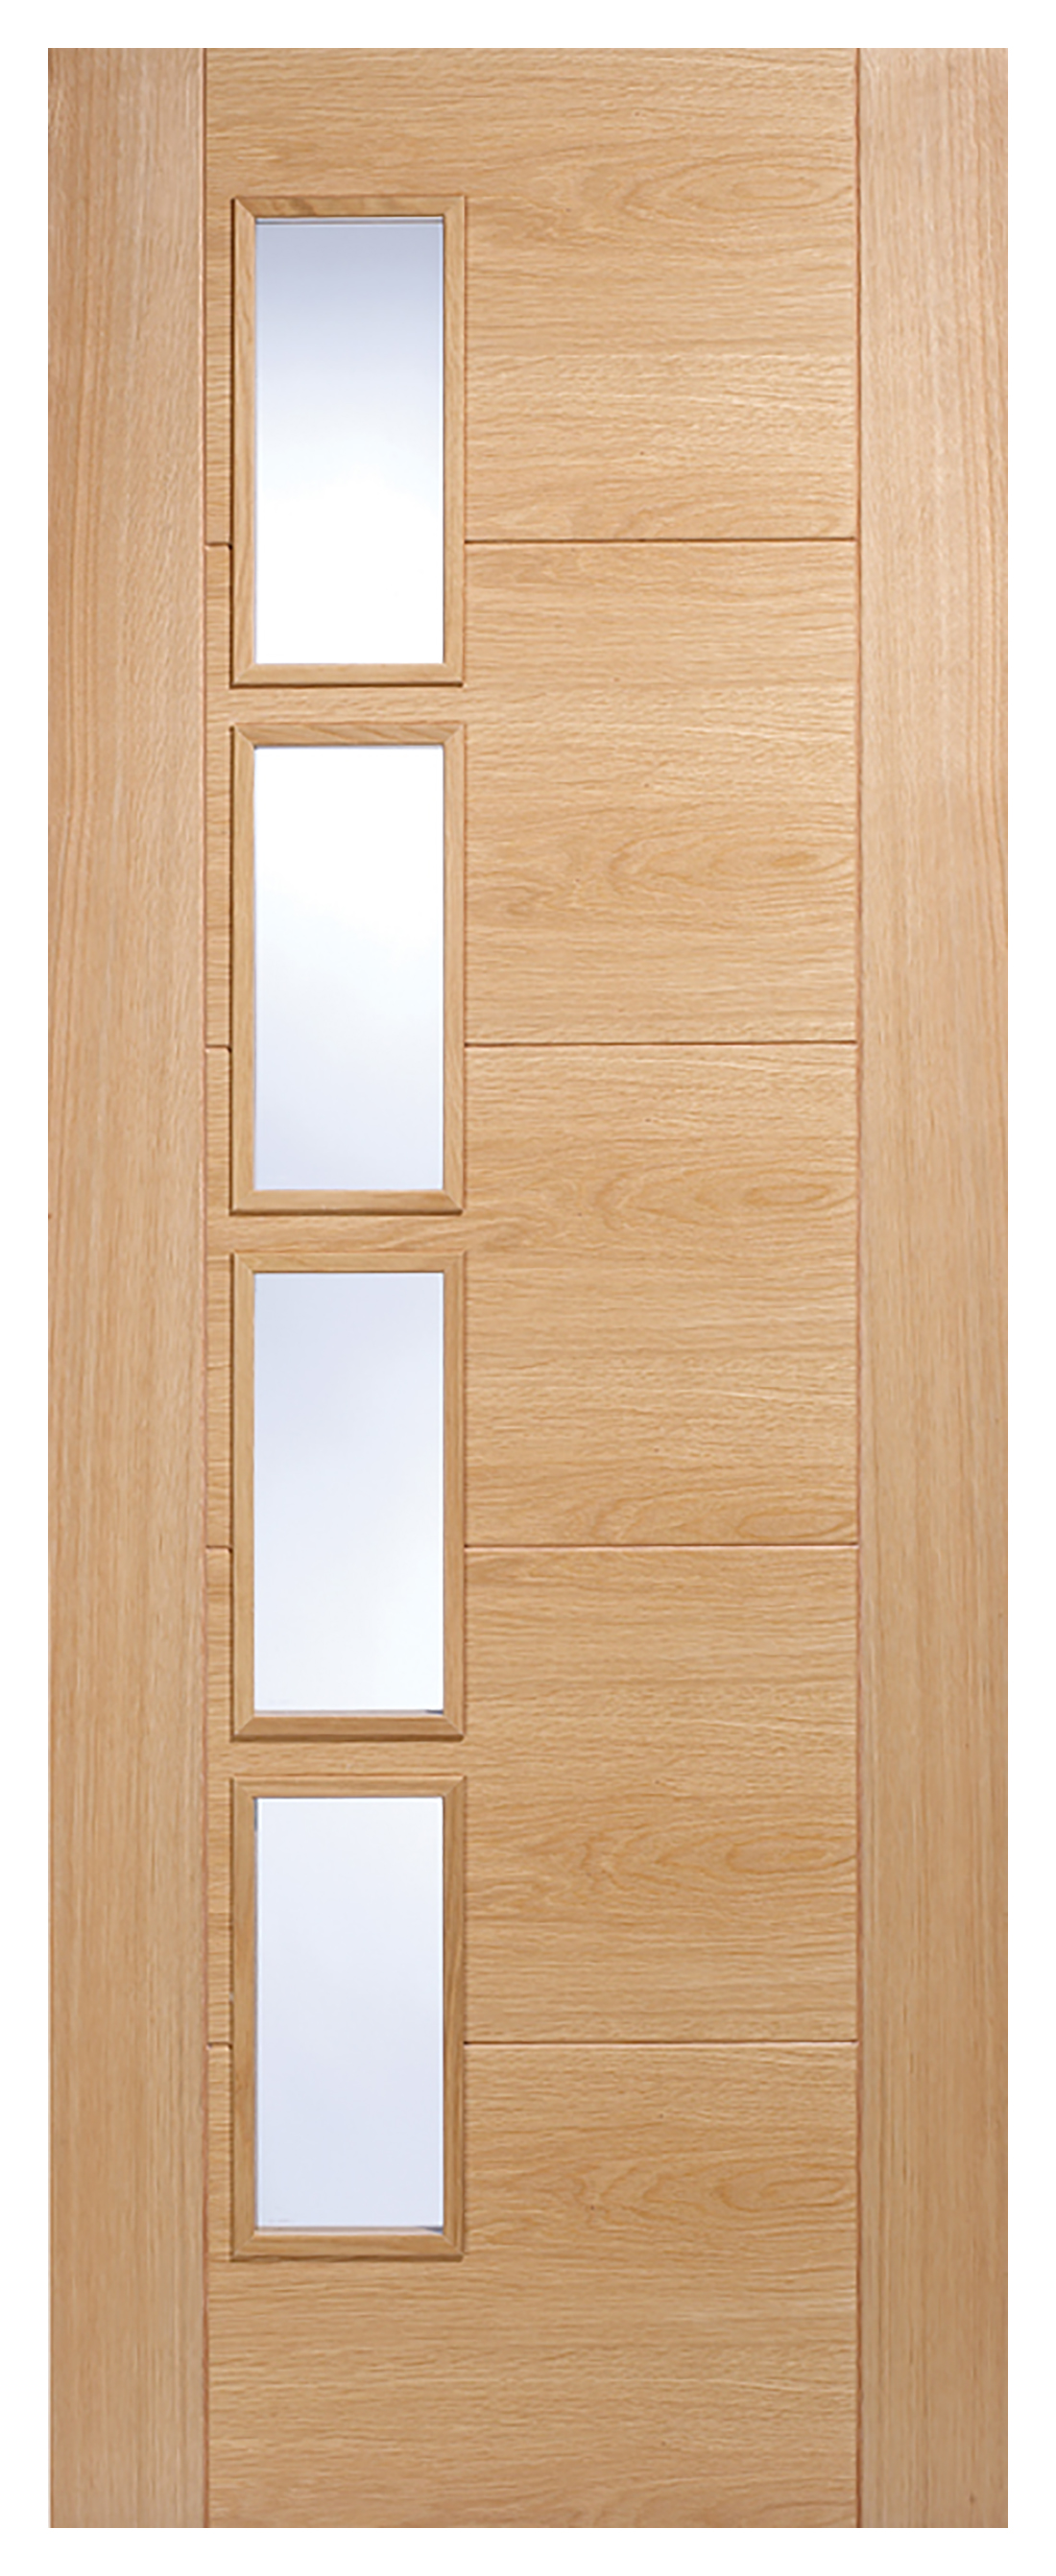 Image of LPD Internal Vancouver 4 Lite Offset Pre-Finished Oak Solid Core Door - 686 x 1981mm